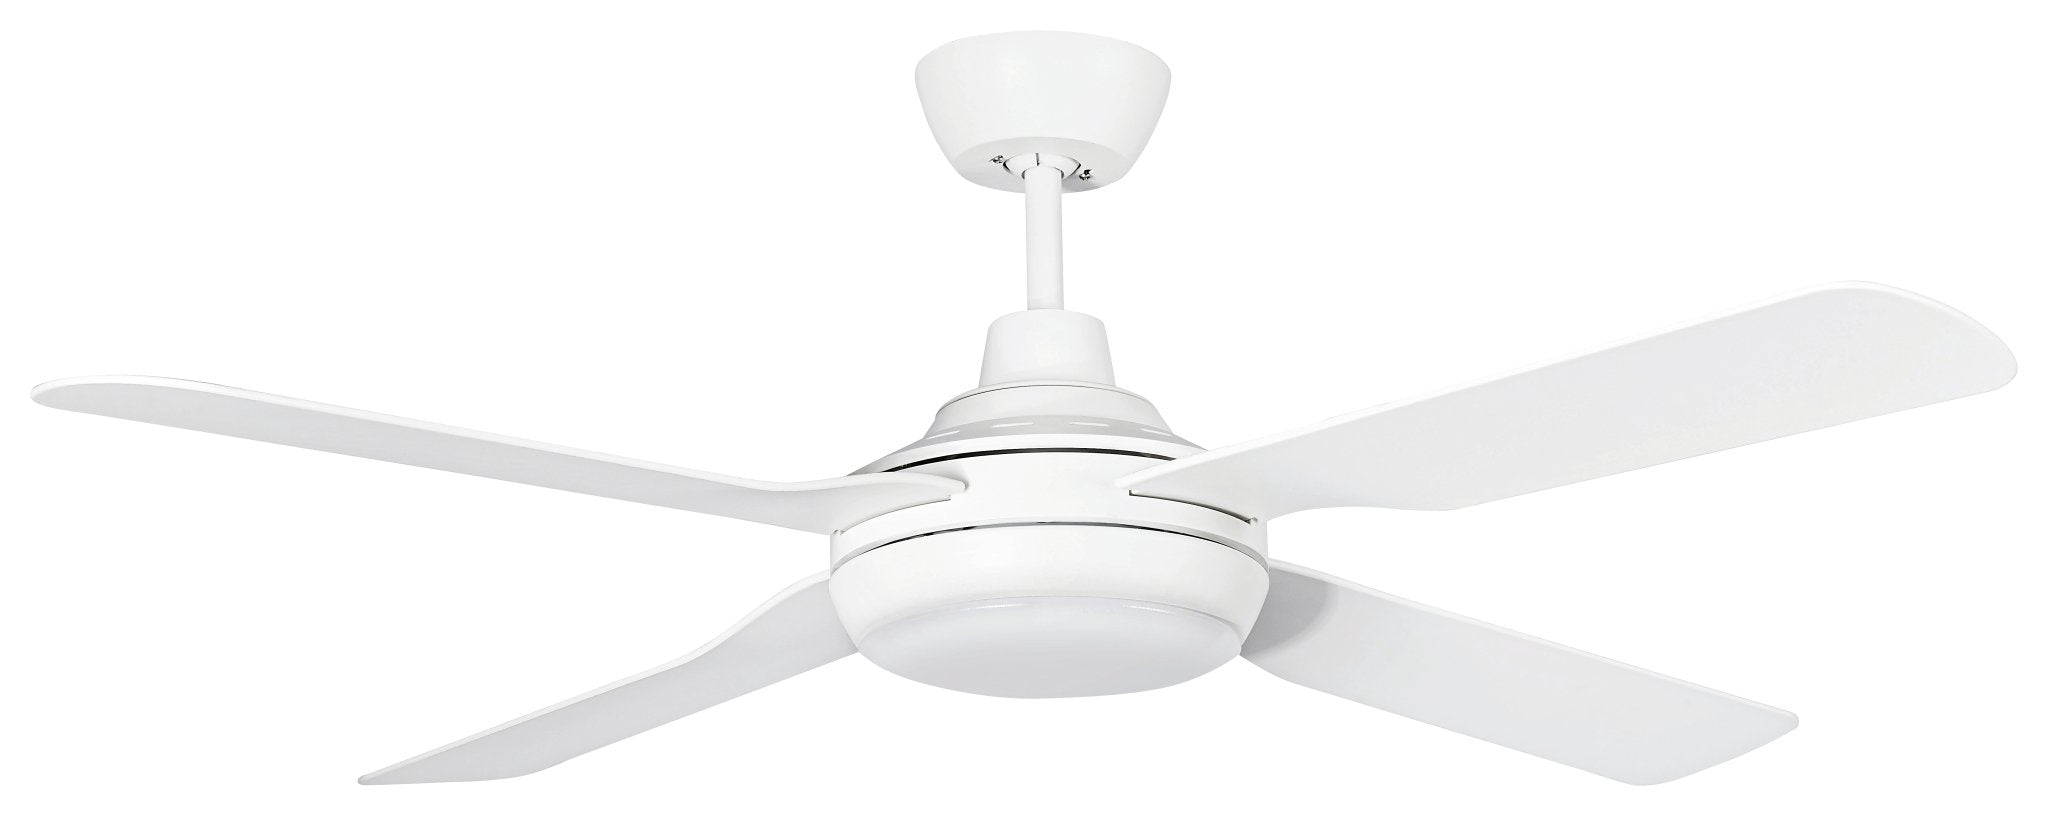 48" Discovery II AC Ceiling Fan, White With Light MDF1243M, MDF1243W Martec Lighting - Mases LightingMartec